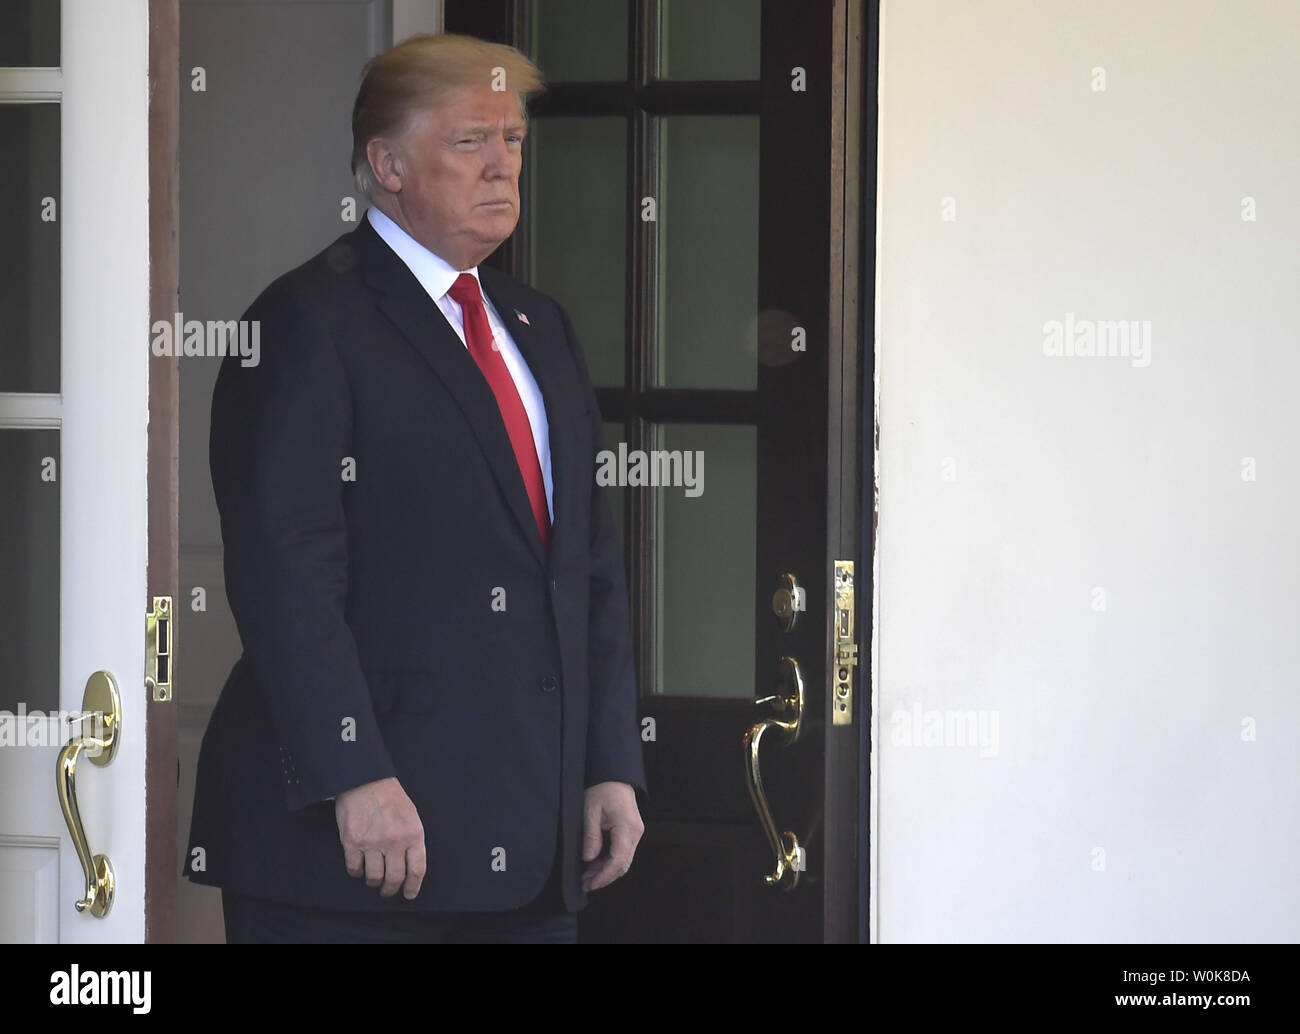 president-donald-trump-waits-in-the-doorway-to-the-west-wing-for-the-arrival-of-chiles-president-sebastian-pinera-to-the-white-house-september-28-2018-in-washington-dc-pinera-who-served-as-president-four-years-ago-is-a-billionaire-entrepreneur-and-will-be-discussing-chiles-slumping-economy-with-trump-photo-by-mike-theilerupi-W0K8DA.jpg